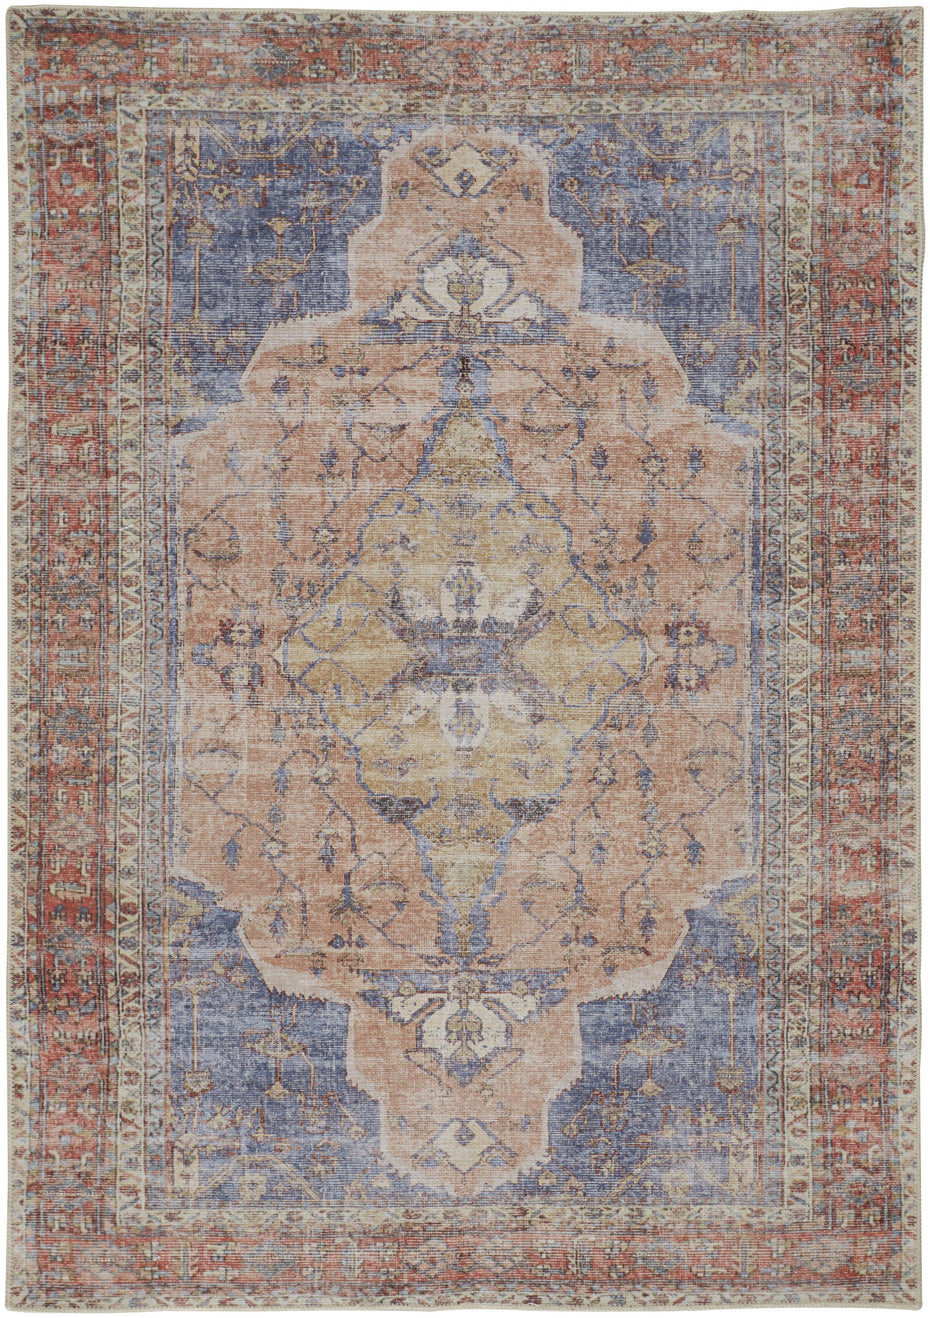 Abstract Area Rug - Red Tan And Blue - 2' X 3'